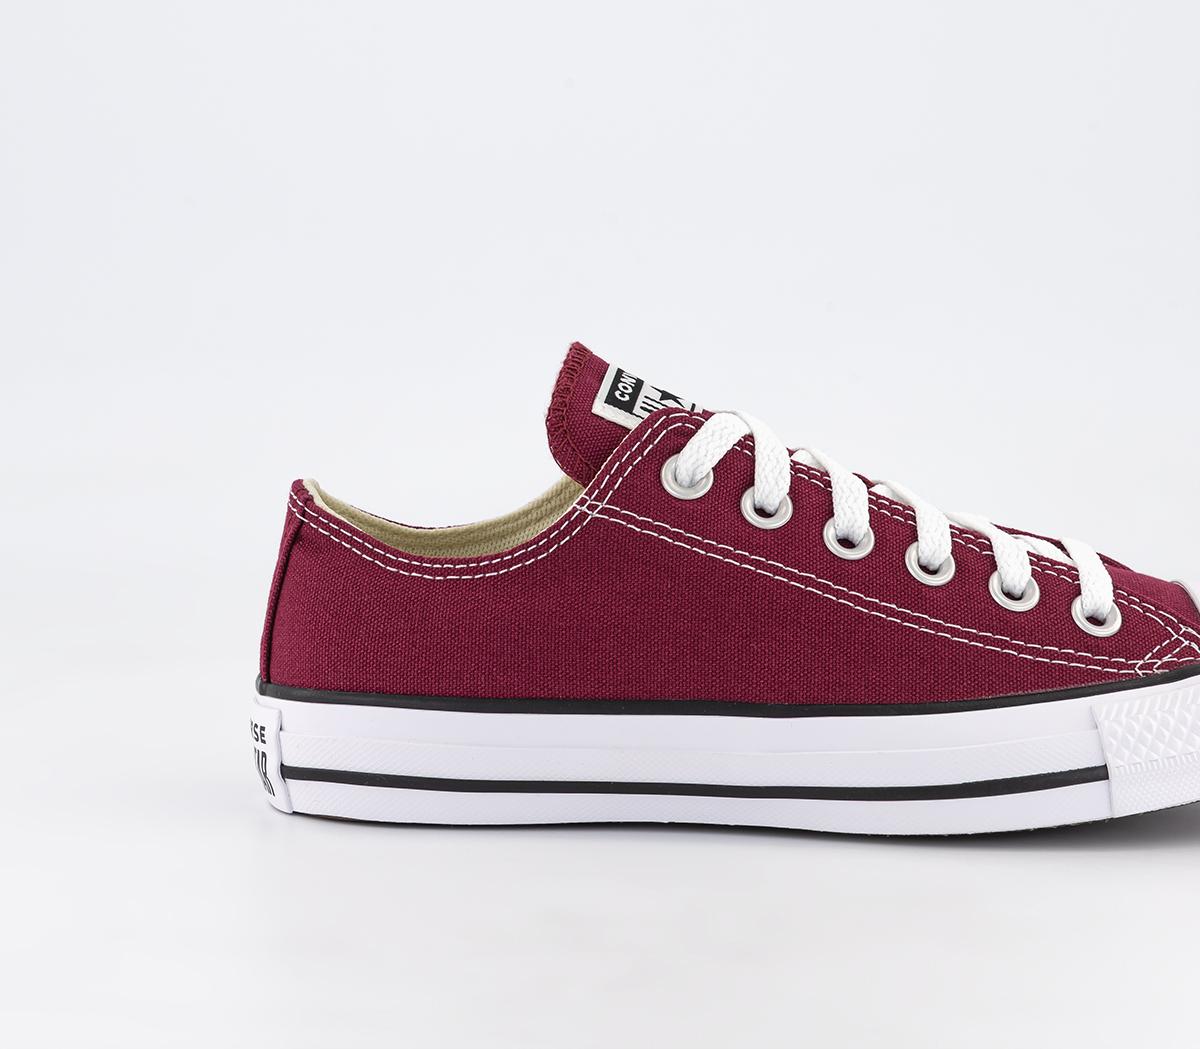 Converse All Star Low Trainers Maroon Canvas - Unisex Sports